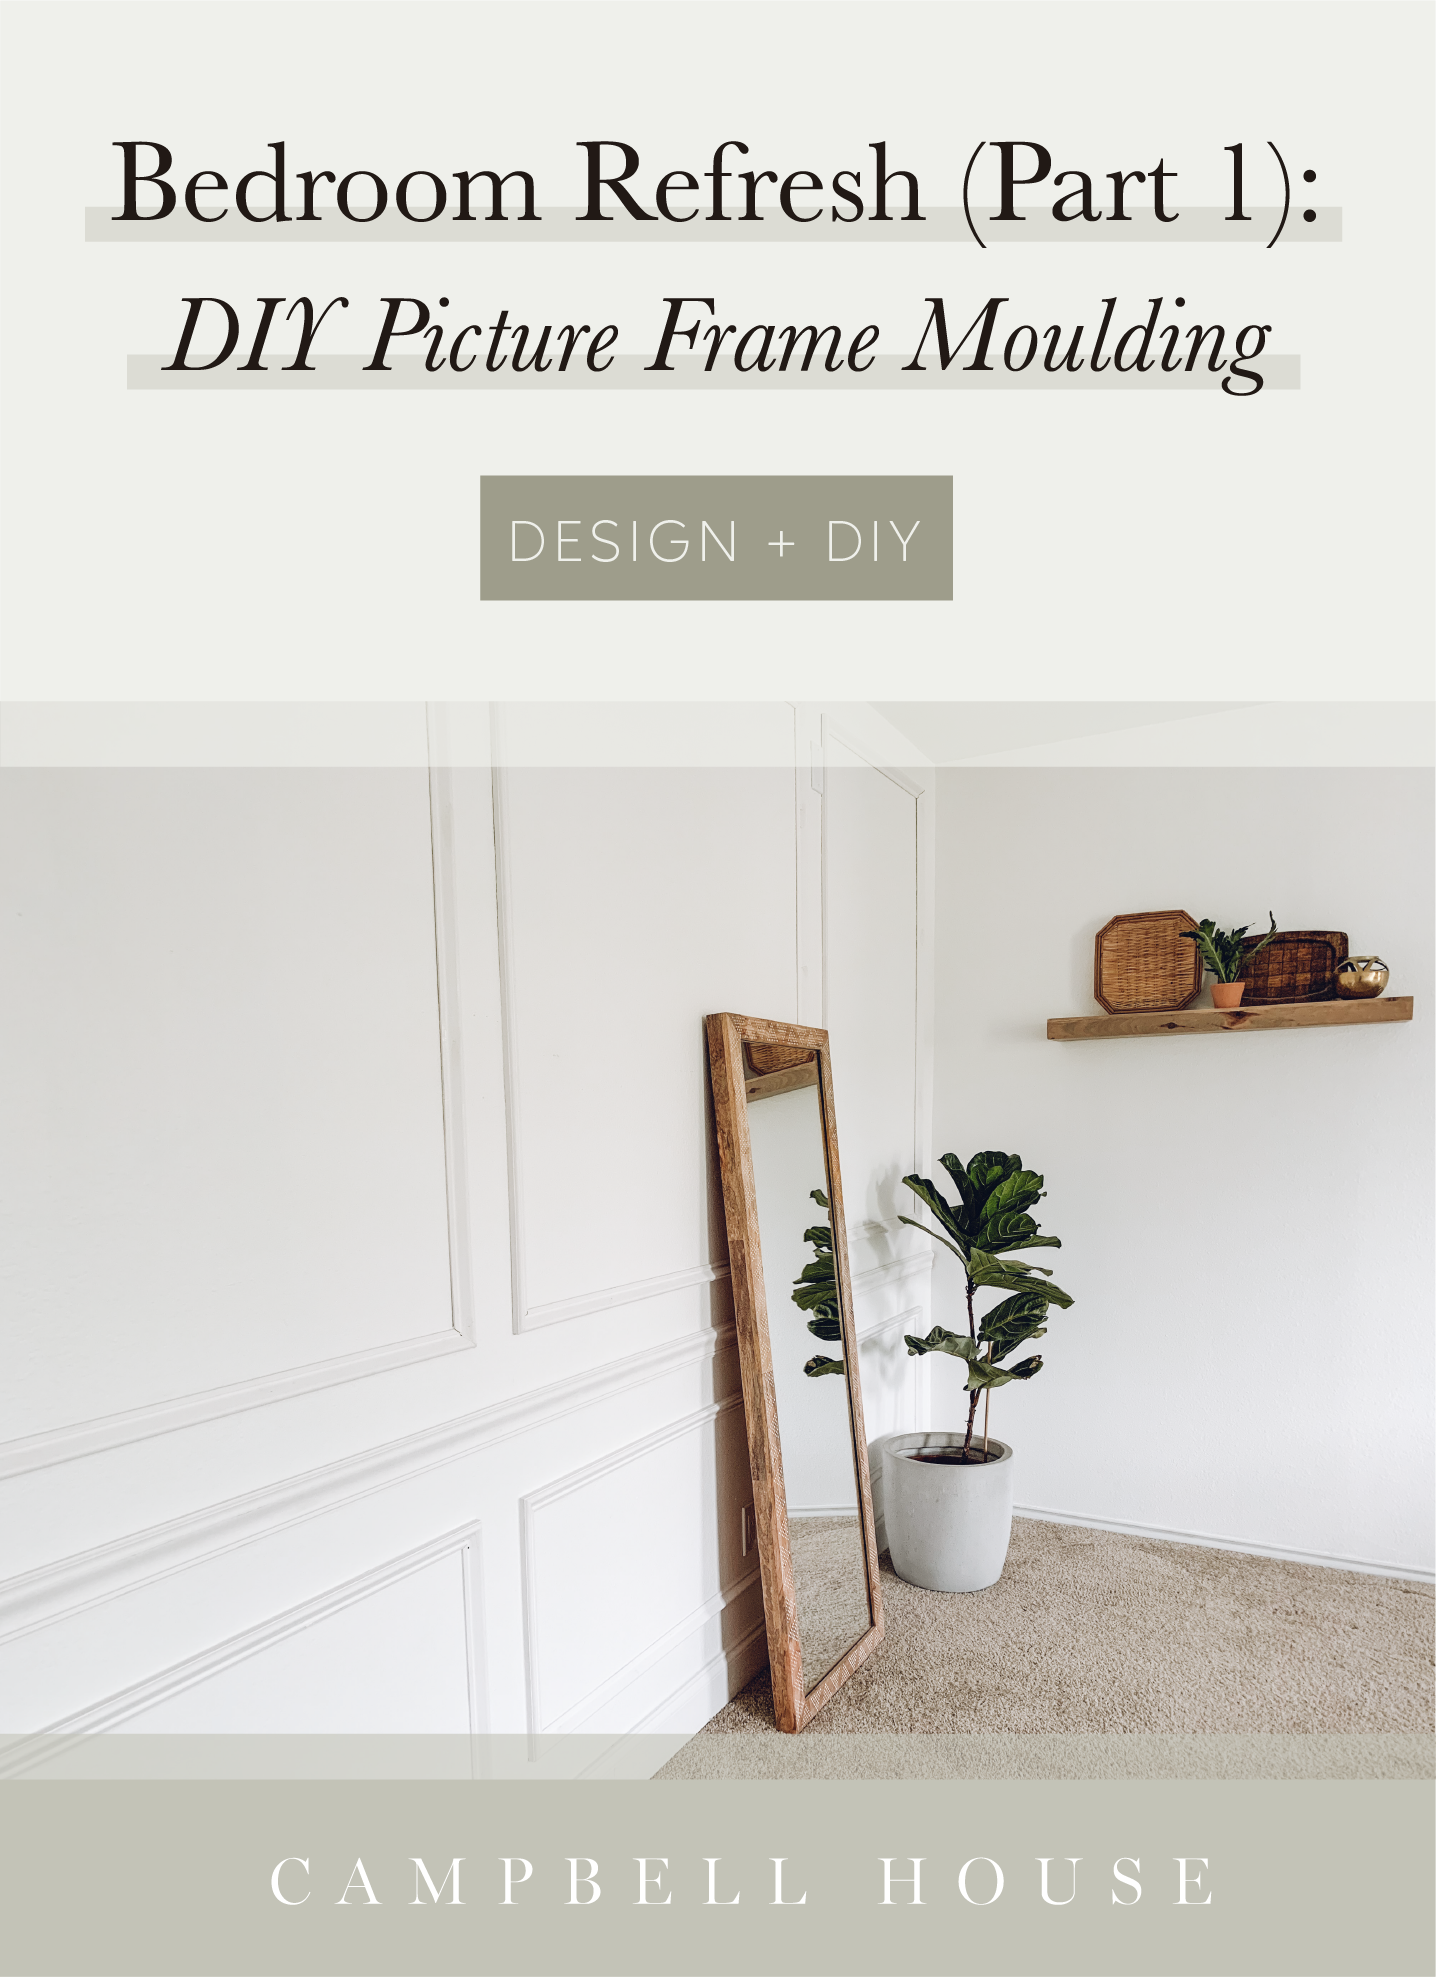 Homemade By Holman: Picture Frame Moldings and a Kitchen and